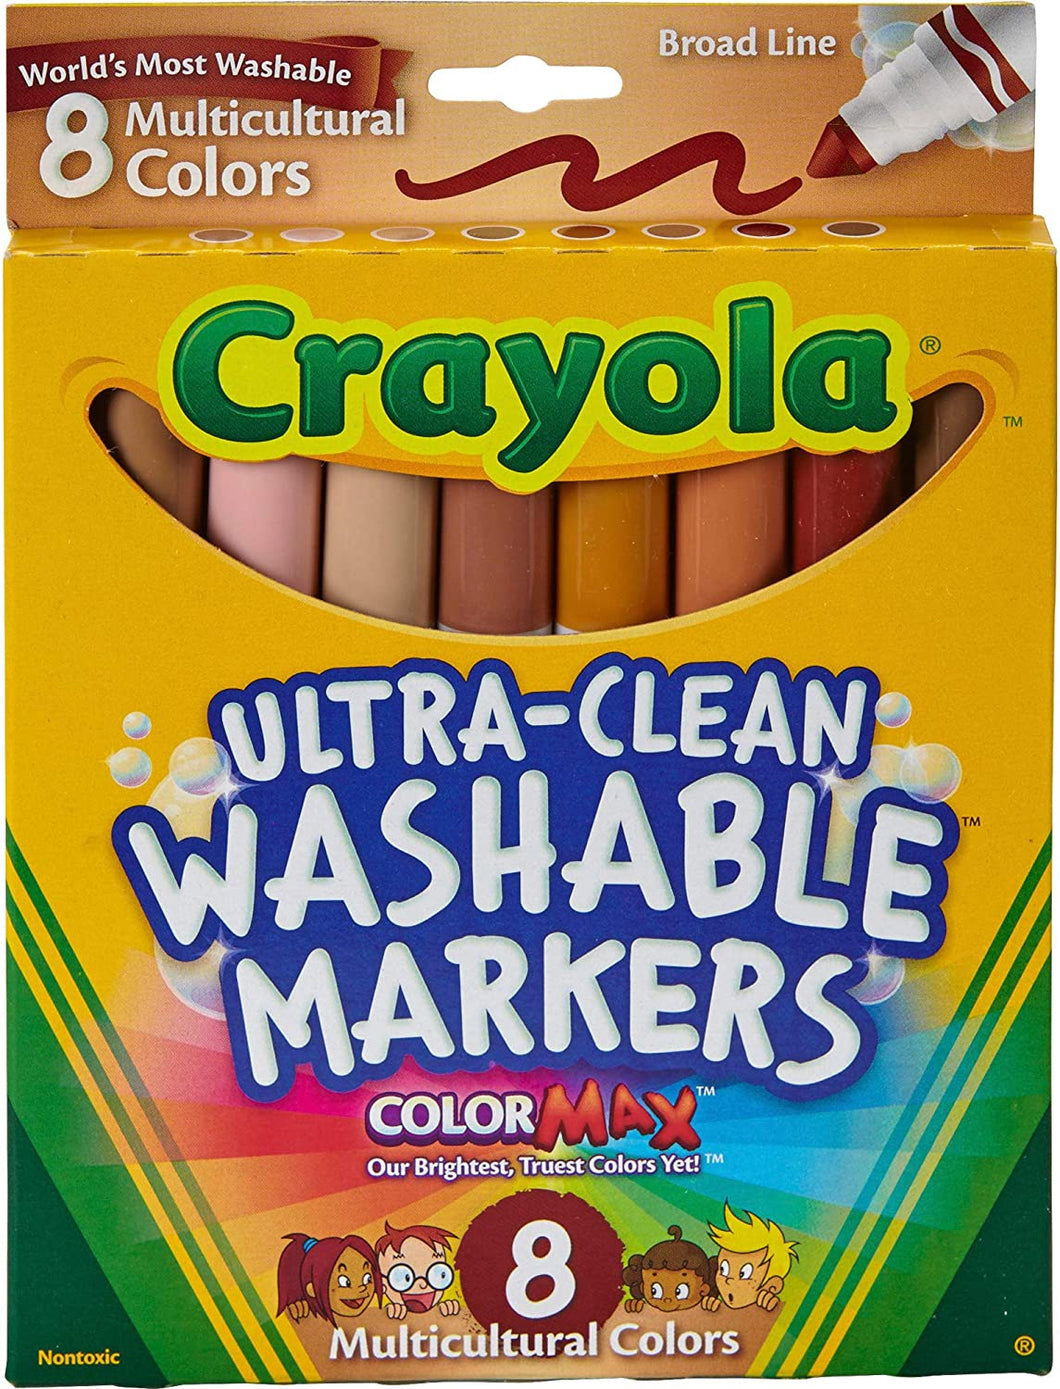 Crayola Multicultural Washable Markers (8 Pack)